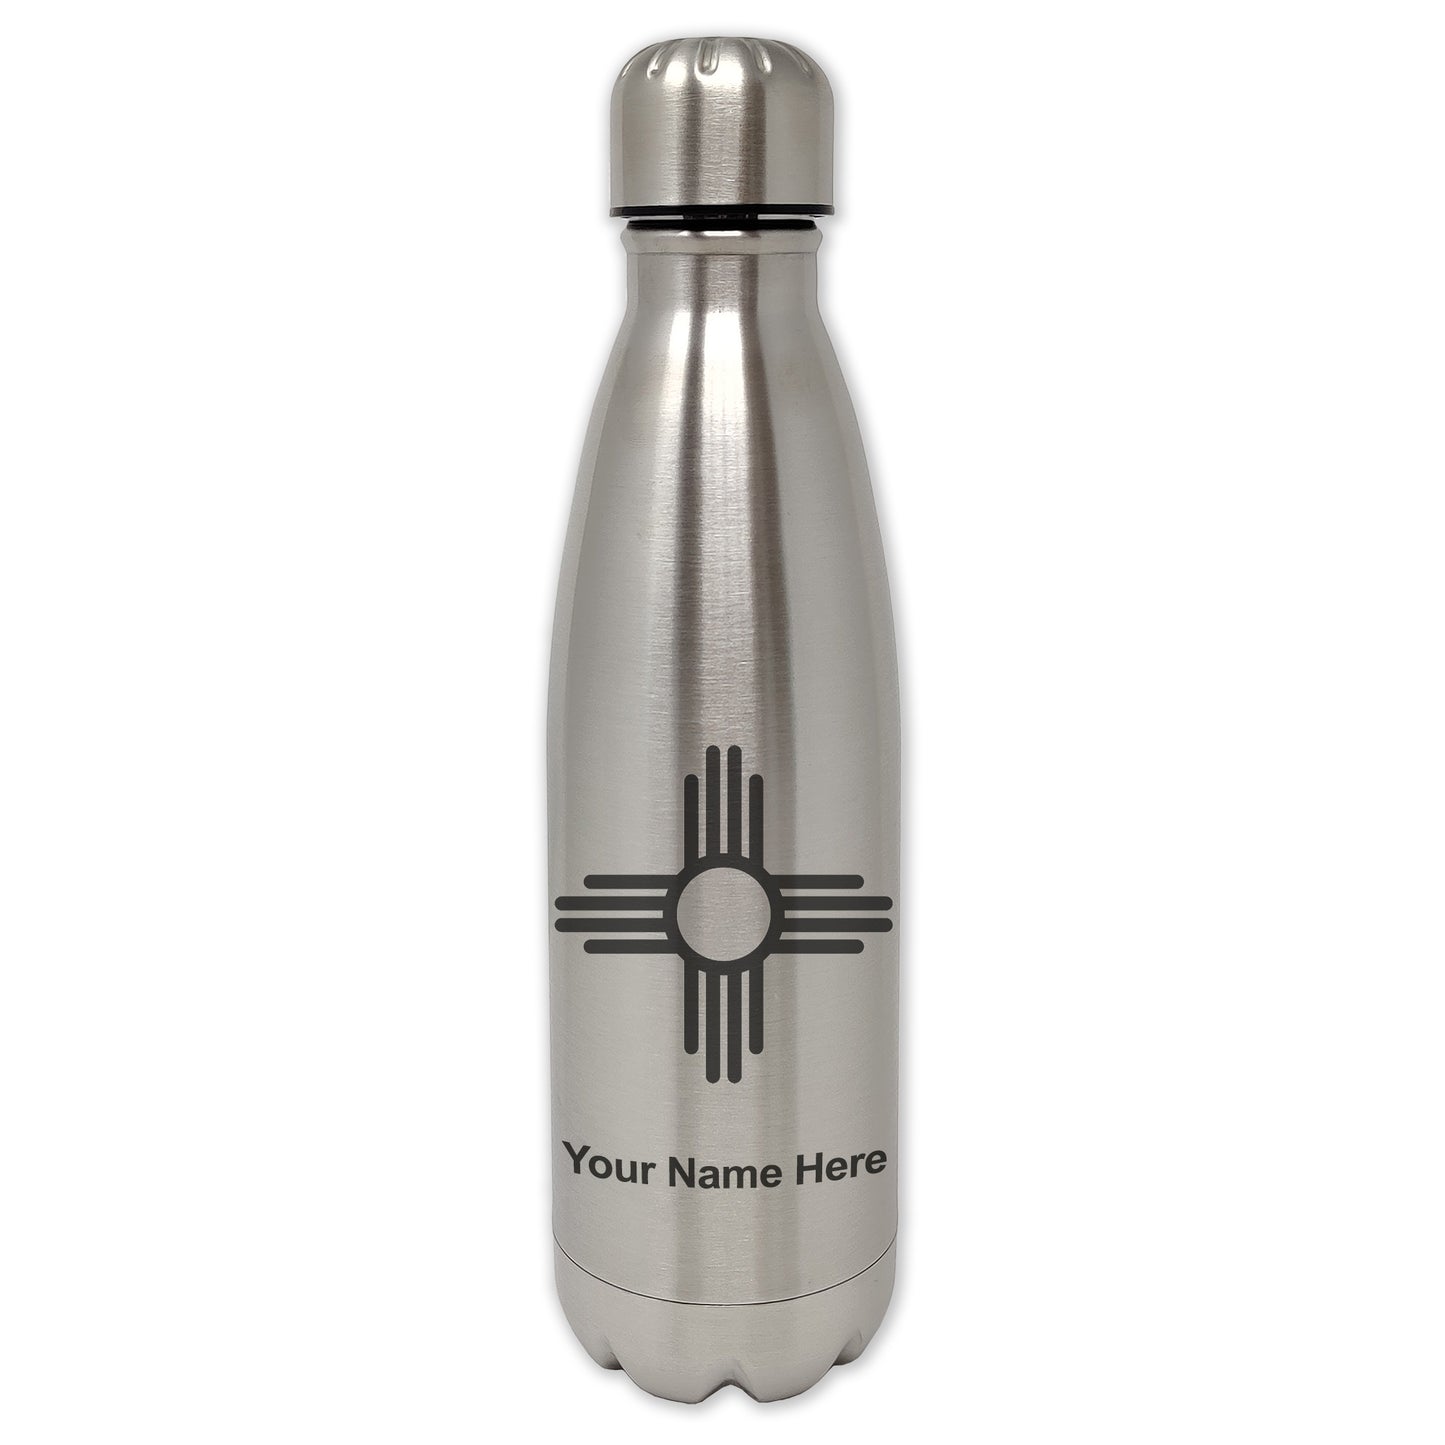 LaserGram Single Wall Water Bottle, Flag of New Mexico, Personalized Engraving Included